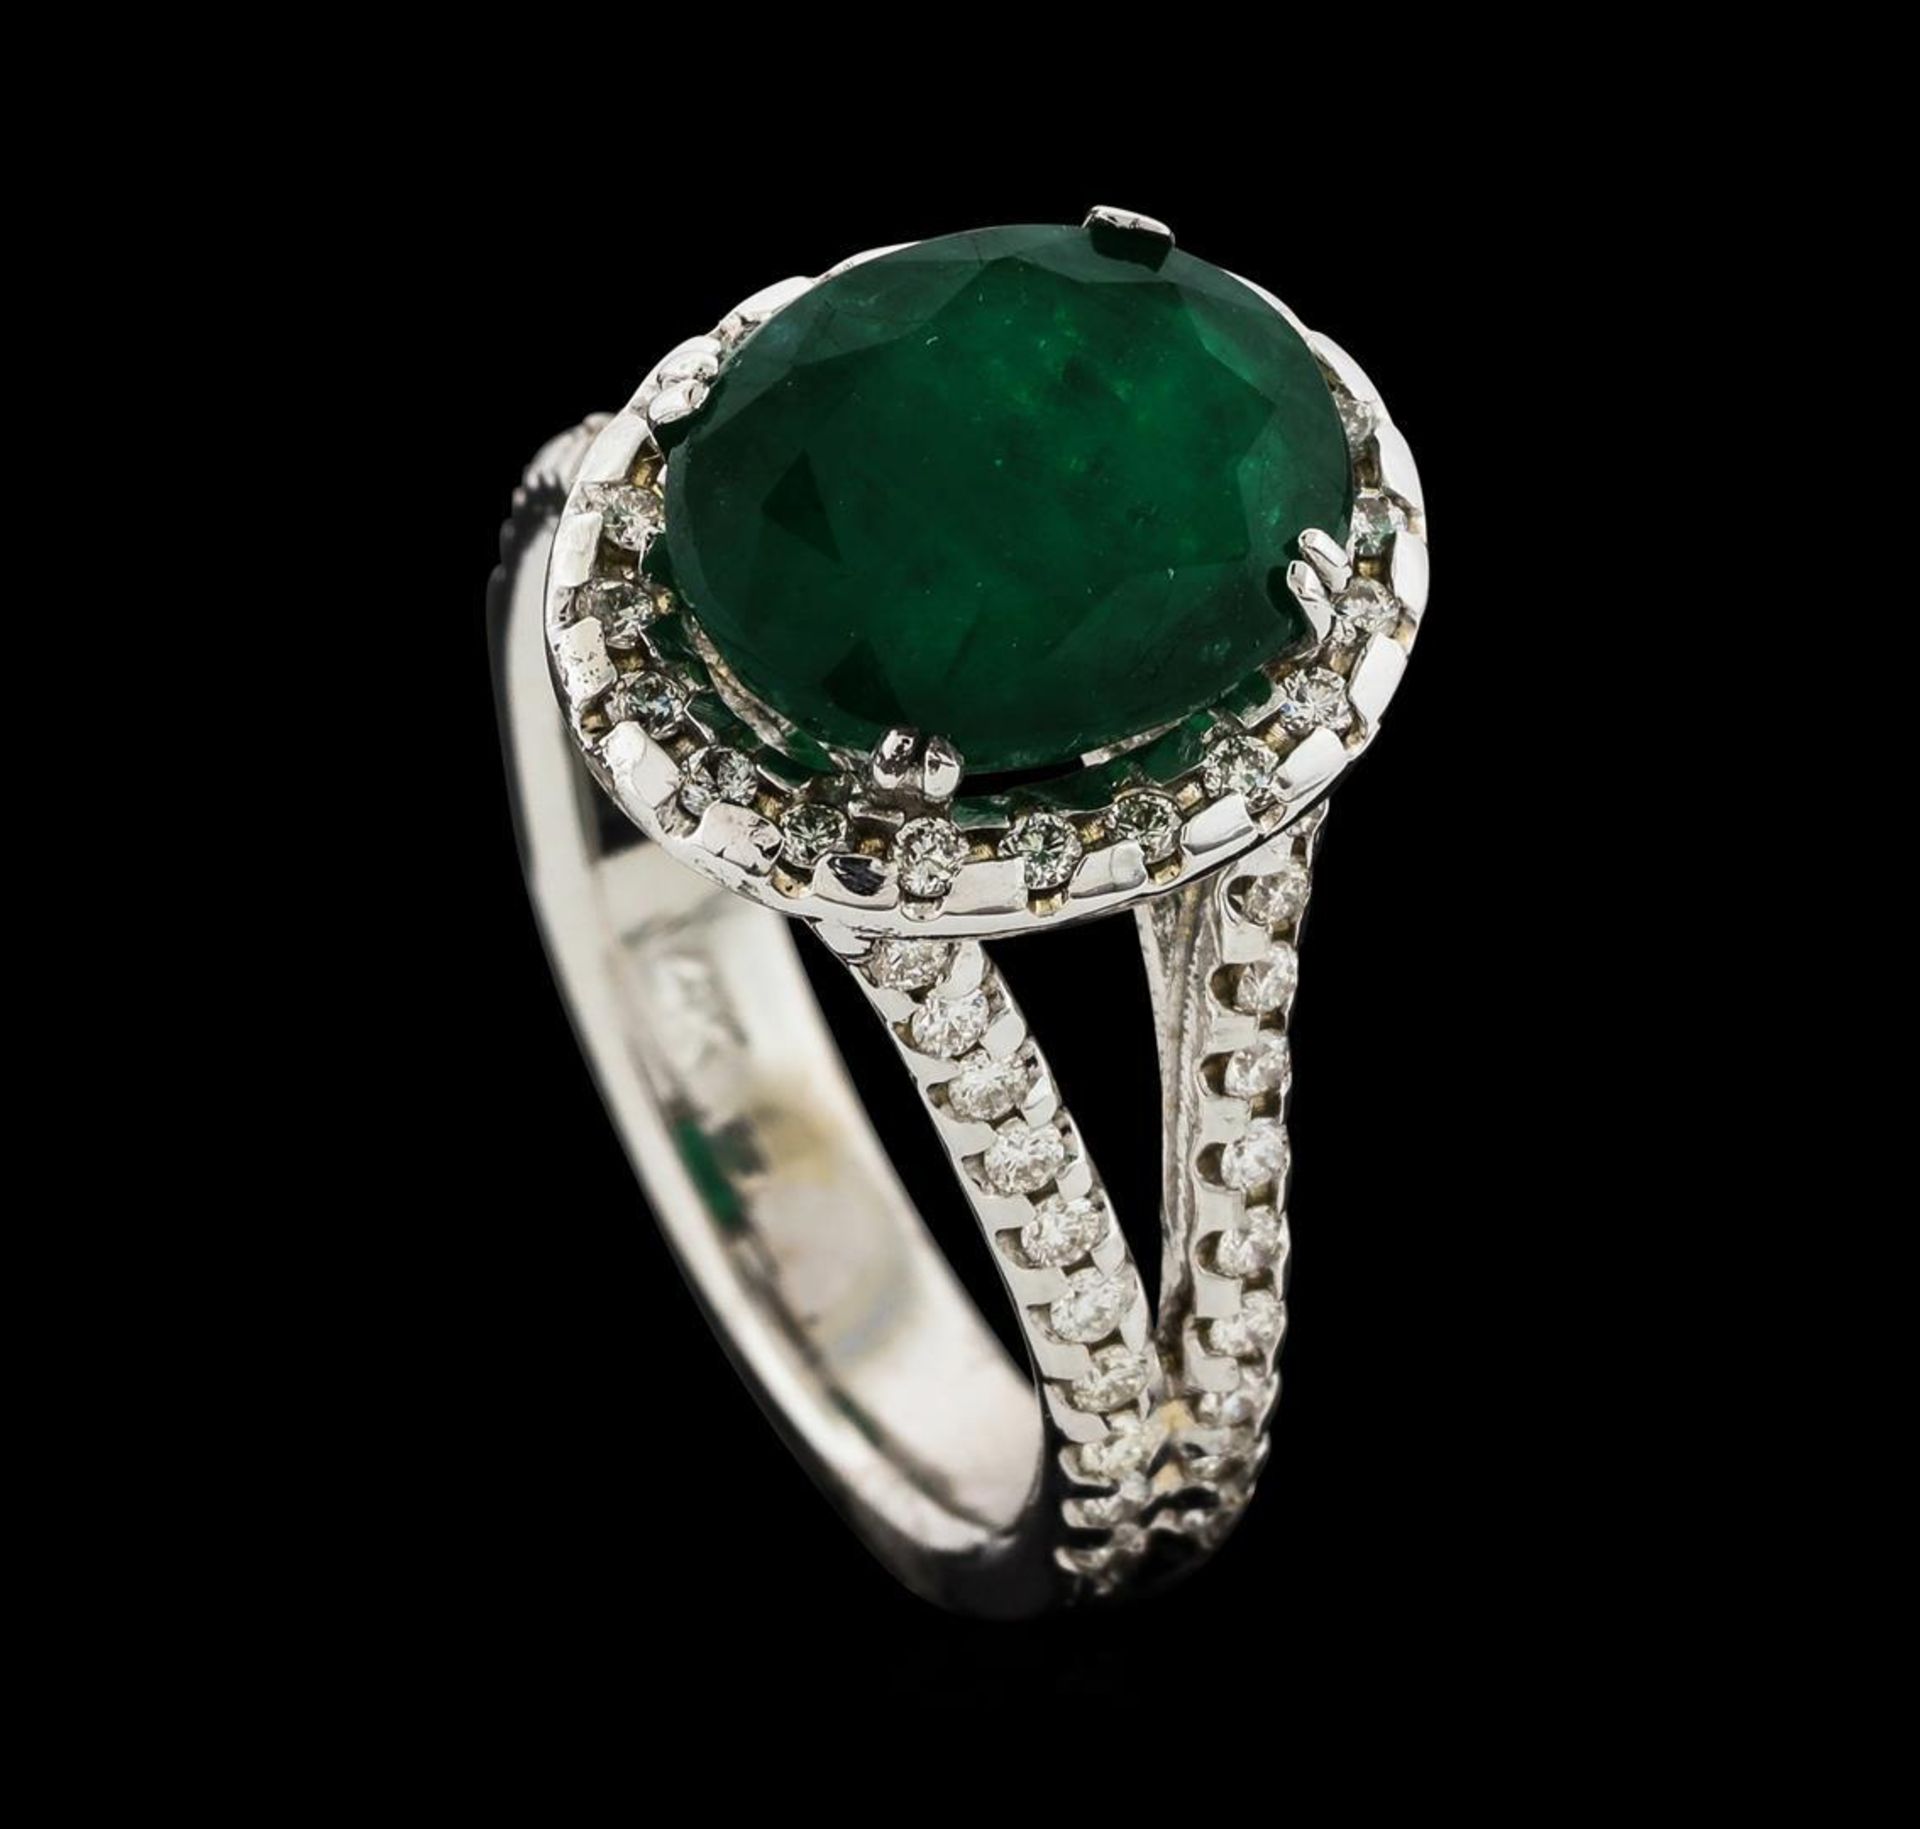 3.70 ctw Emerald and Diamond Ring - 14KT White Gold - Image 4 of 5